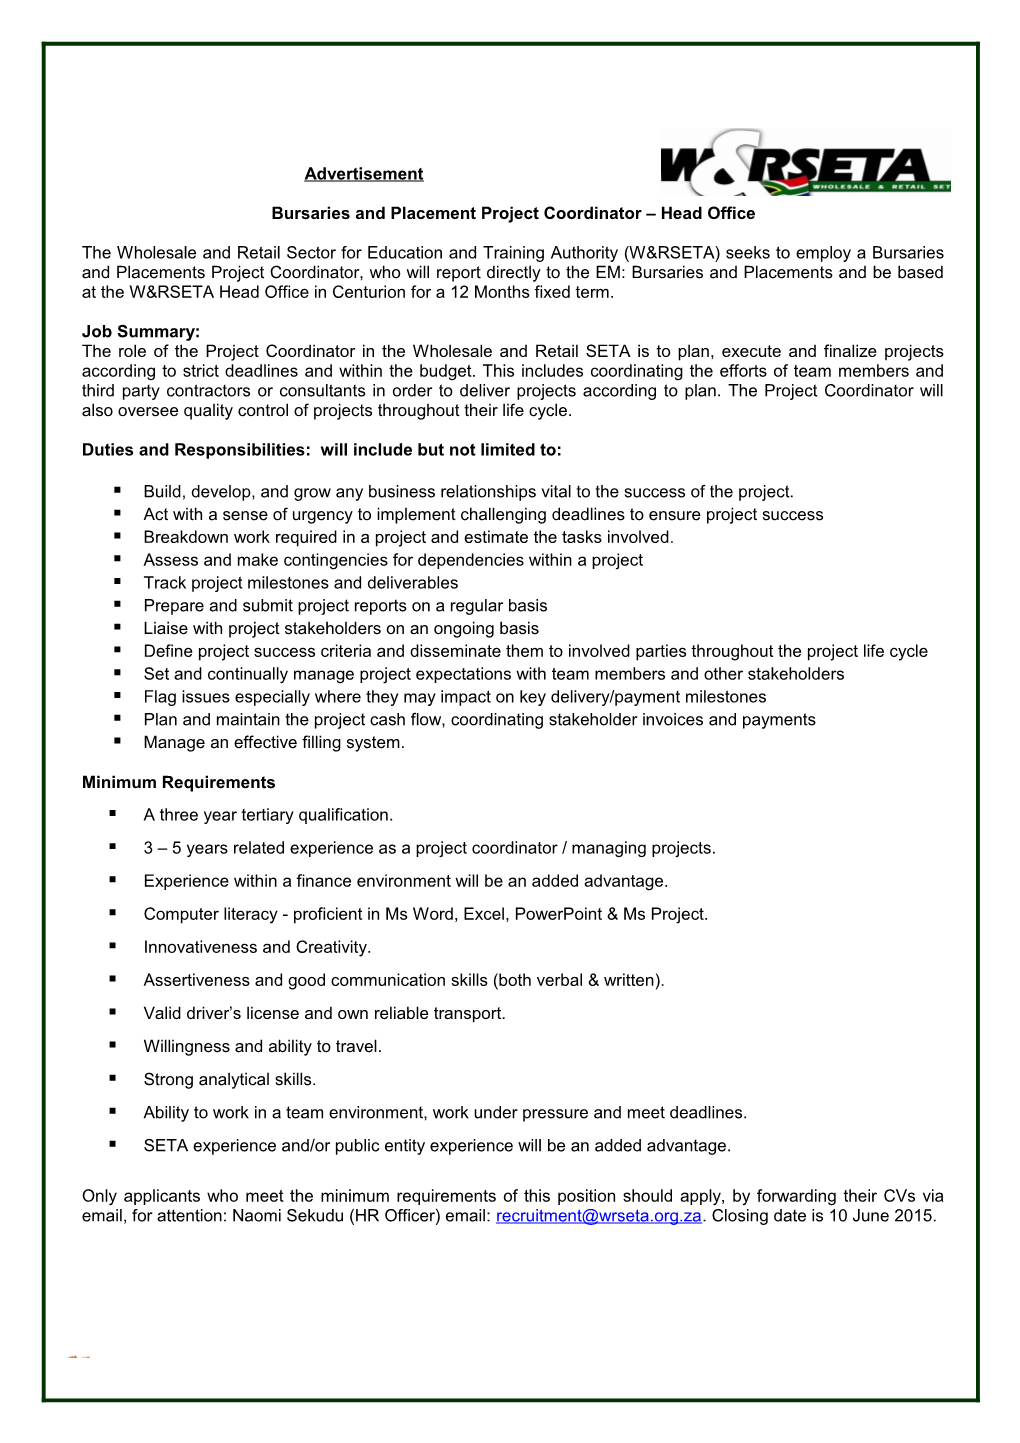 Bursaries and Placement Project Coordinator Head Office